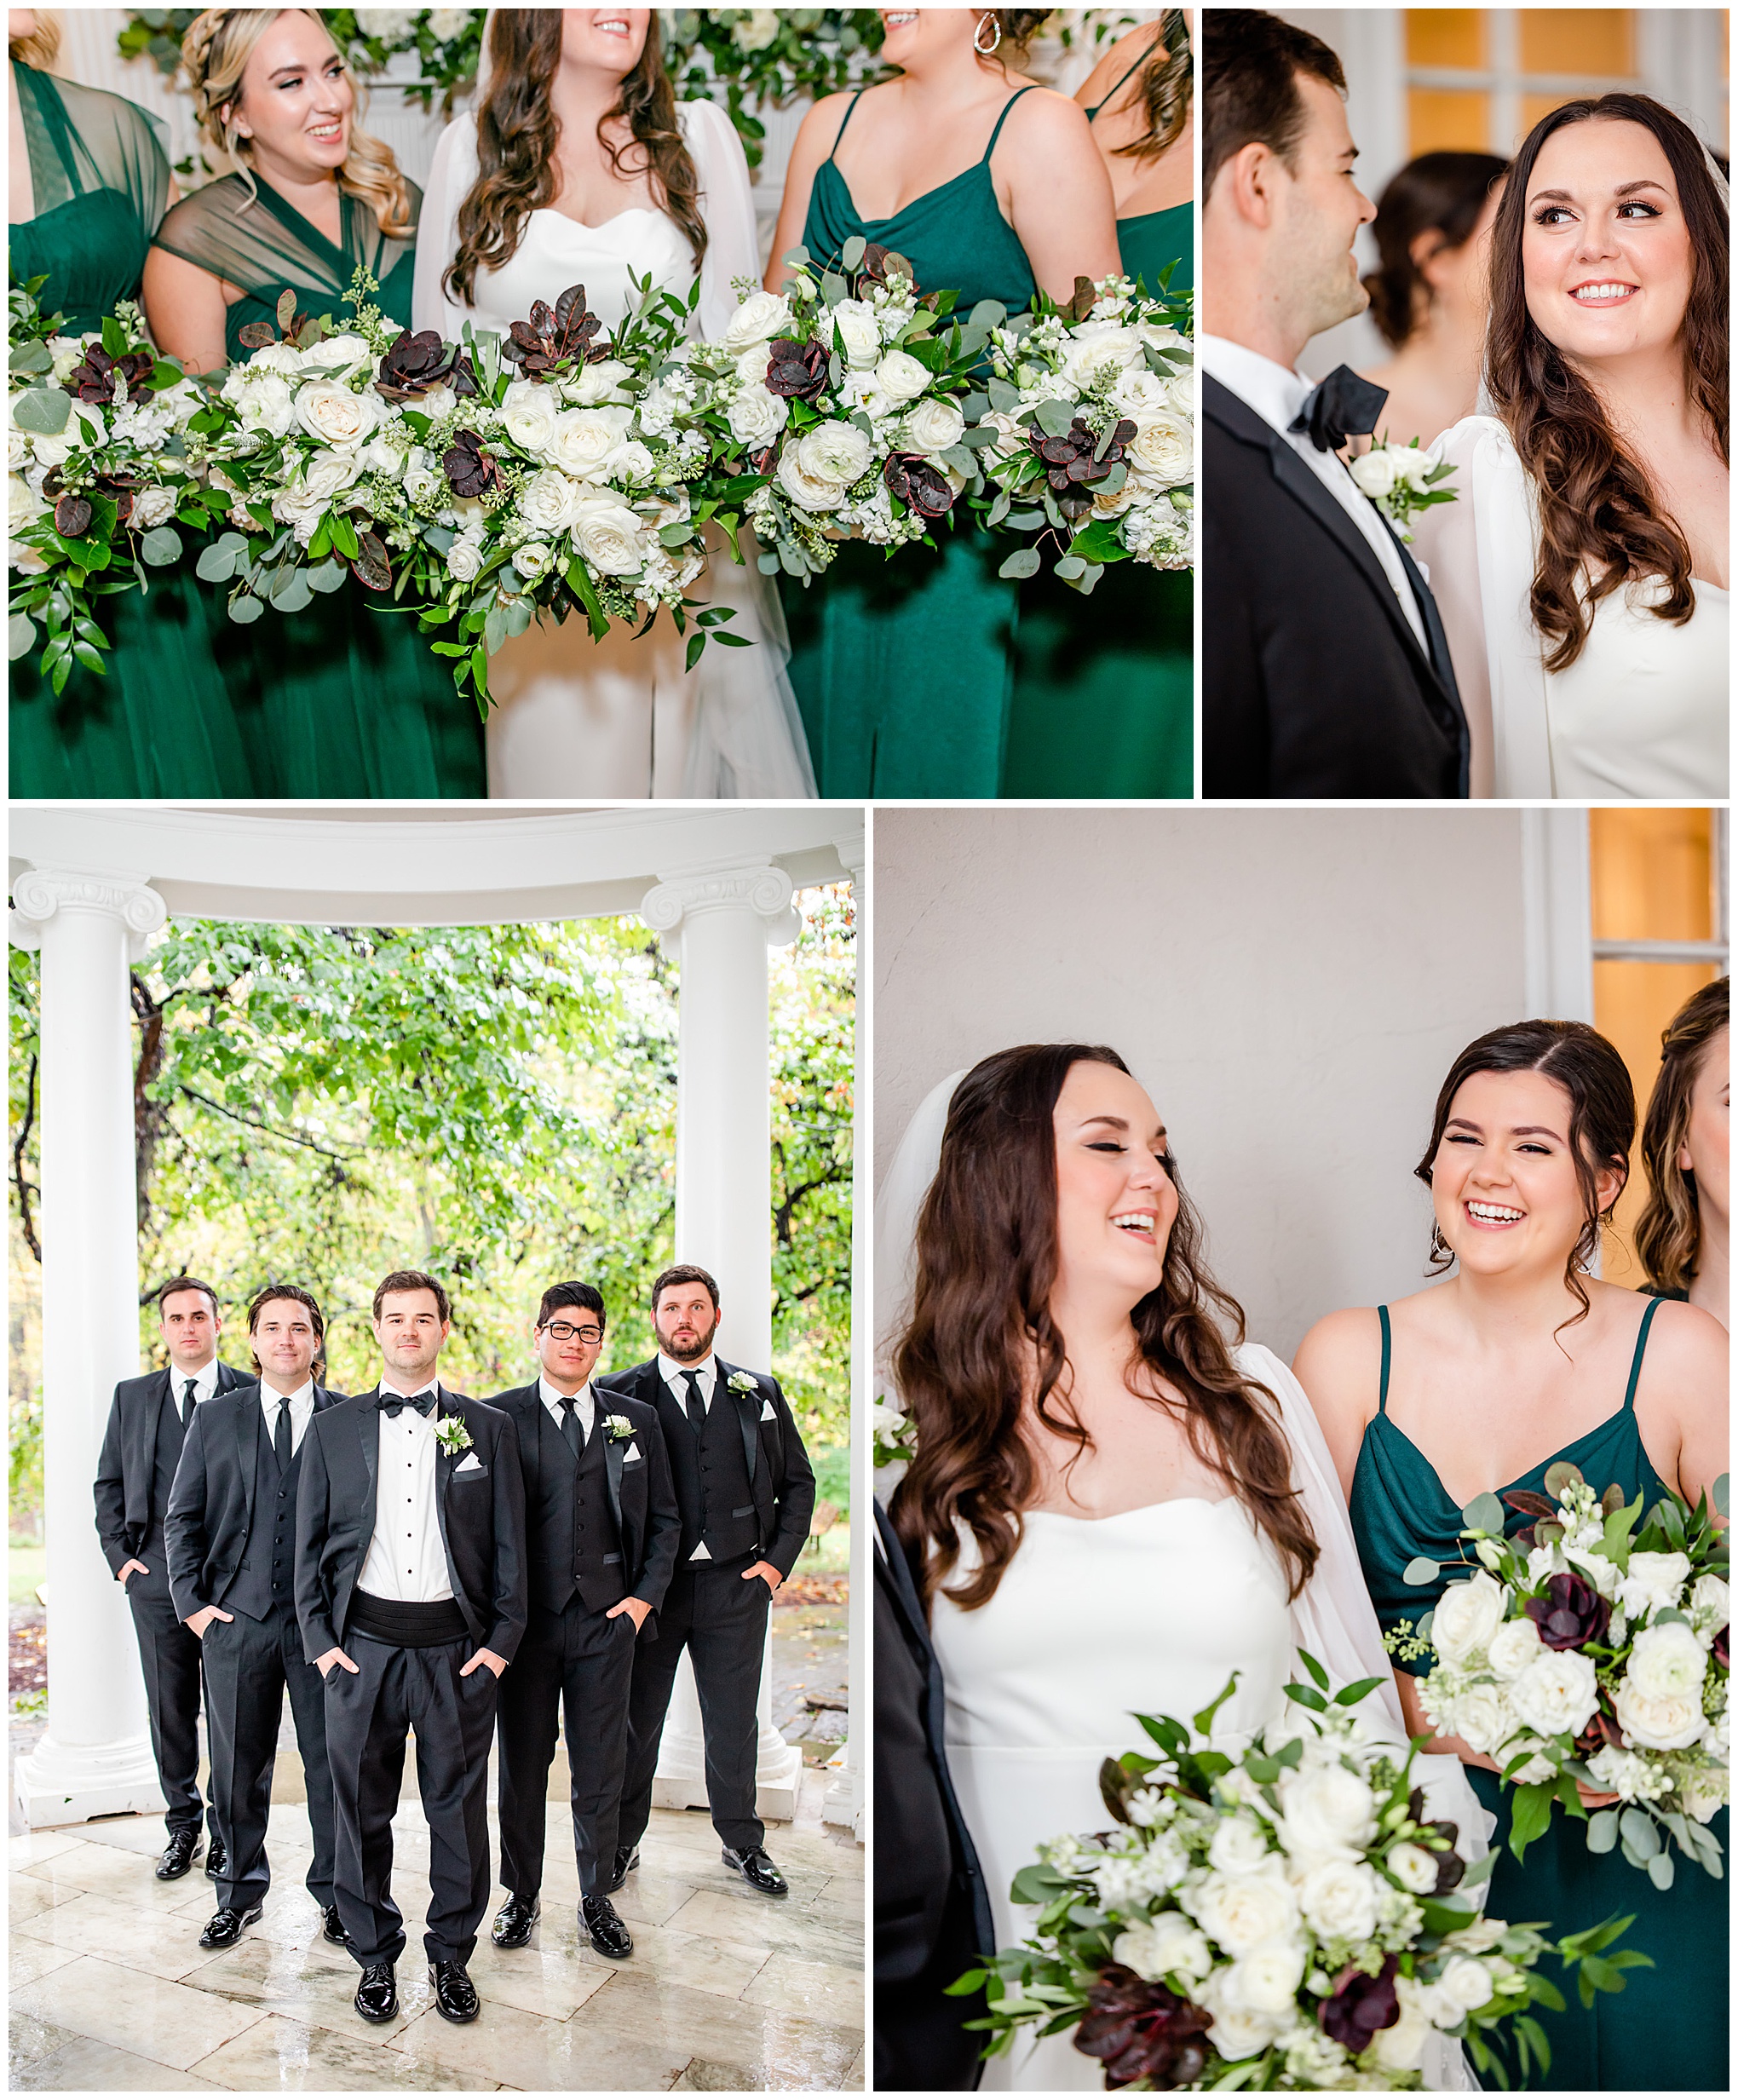 emerald and ivory Woodend Sanctuary wedding, autumn Woodend Sanctuary wedding, rainy day wedding, Maryland wedding venues, Chevy Chase MD wedding venue, mansion wedding, manor house wedding, indoor wedding, DC wedding venue, DC wedding photographer, Baltimore wedding photographer, Rachel E.H. Photography, emerald and ivory aesthetic, groom with groomsmen, bride with bridesmaids, bride and groom looking at each other